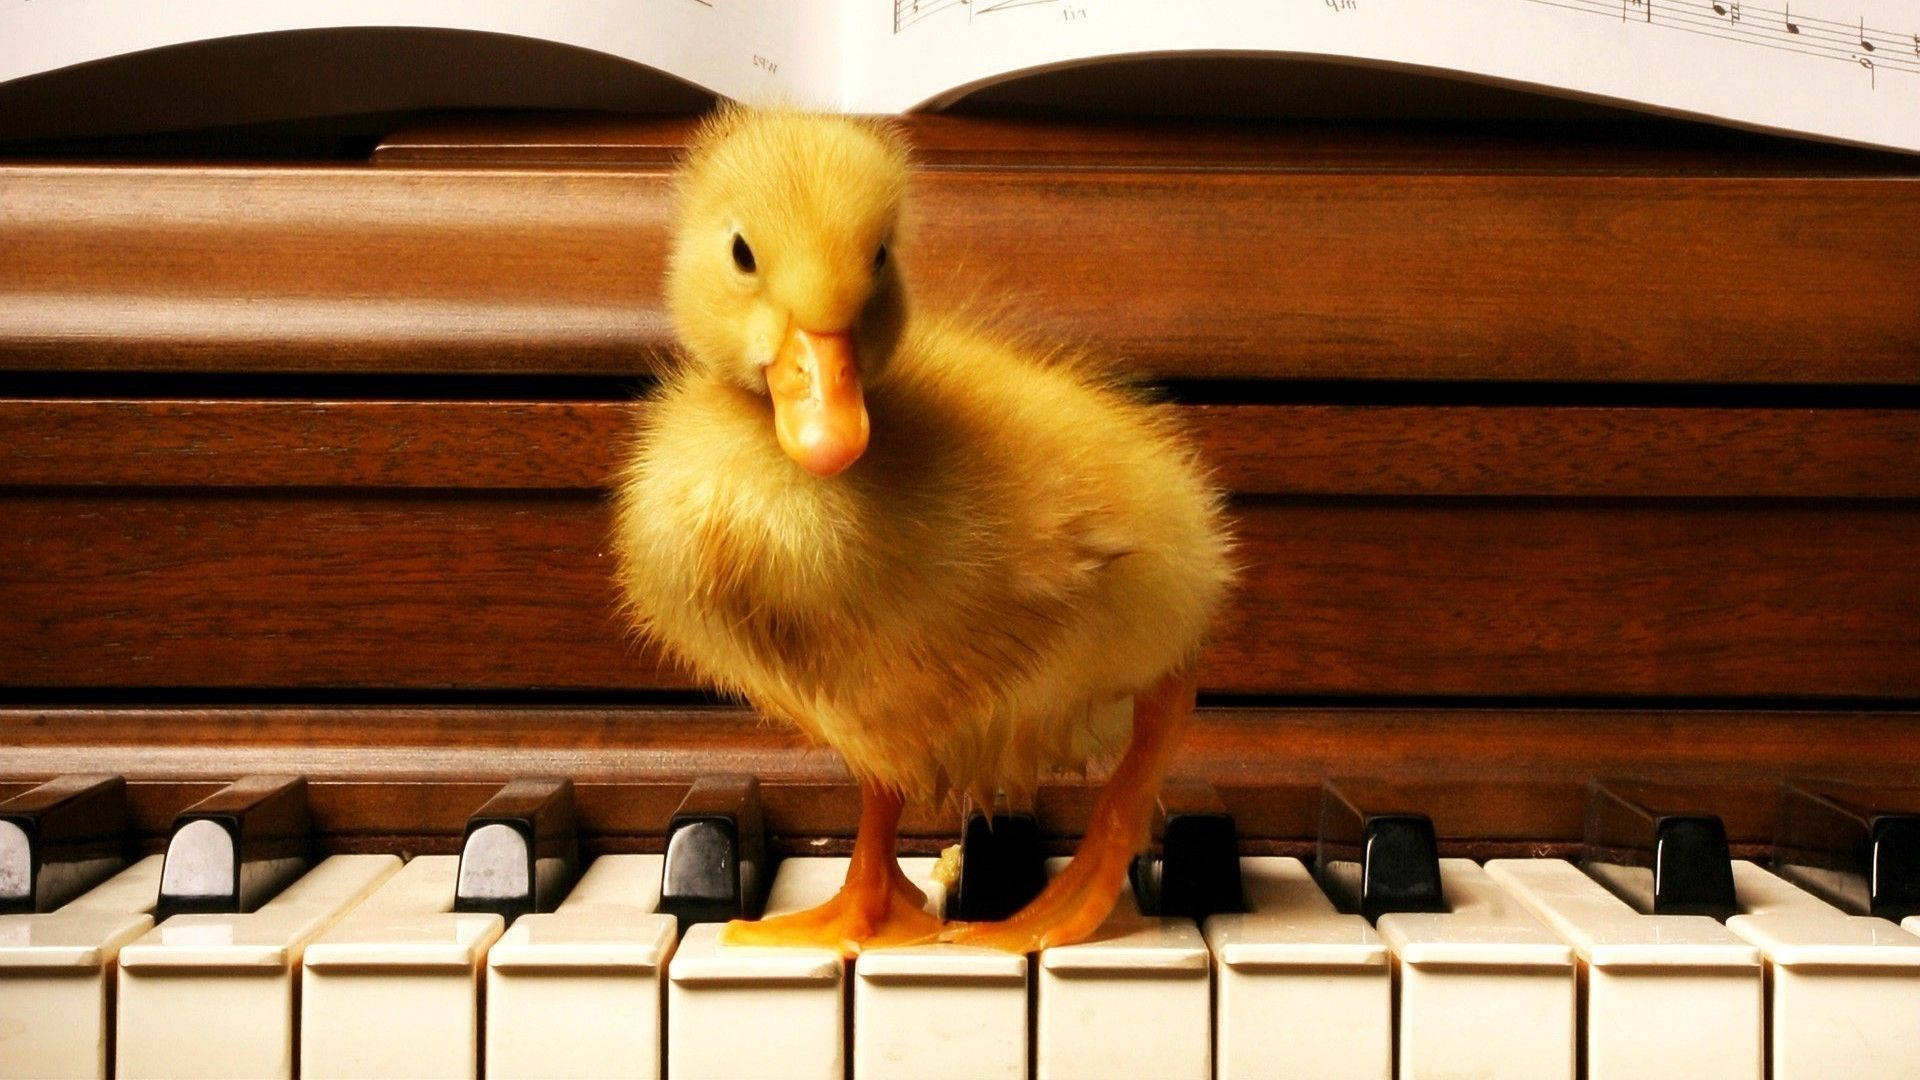 Baby Duck On Piano Background